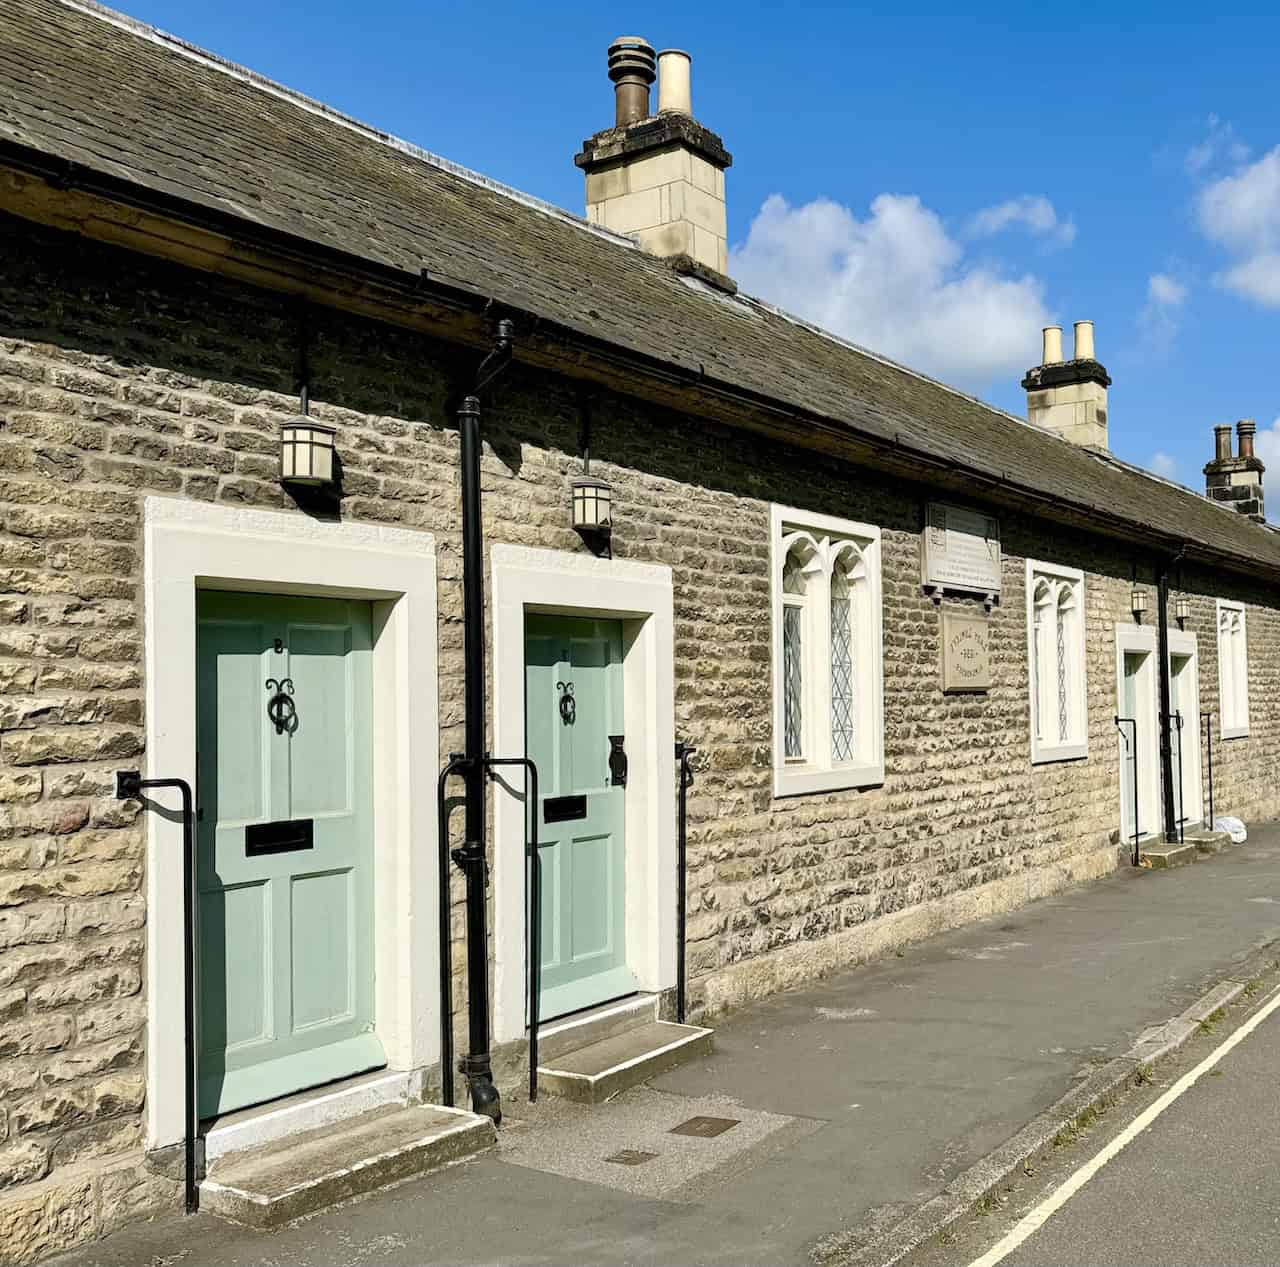 Early into our Dalby Forest walk, we encounter the charming almshouses on Church Hill in the centre of Thornton-le-Dale village.